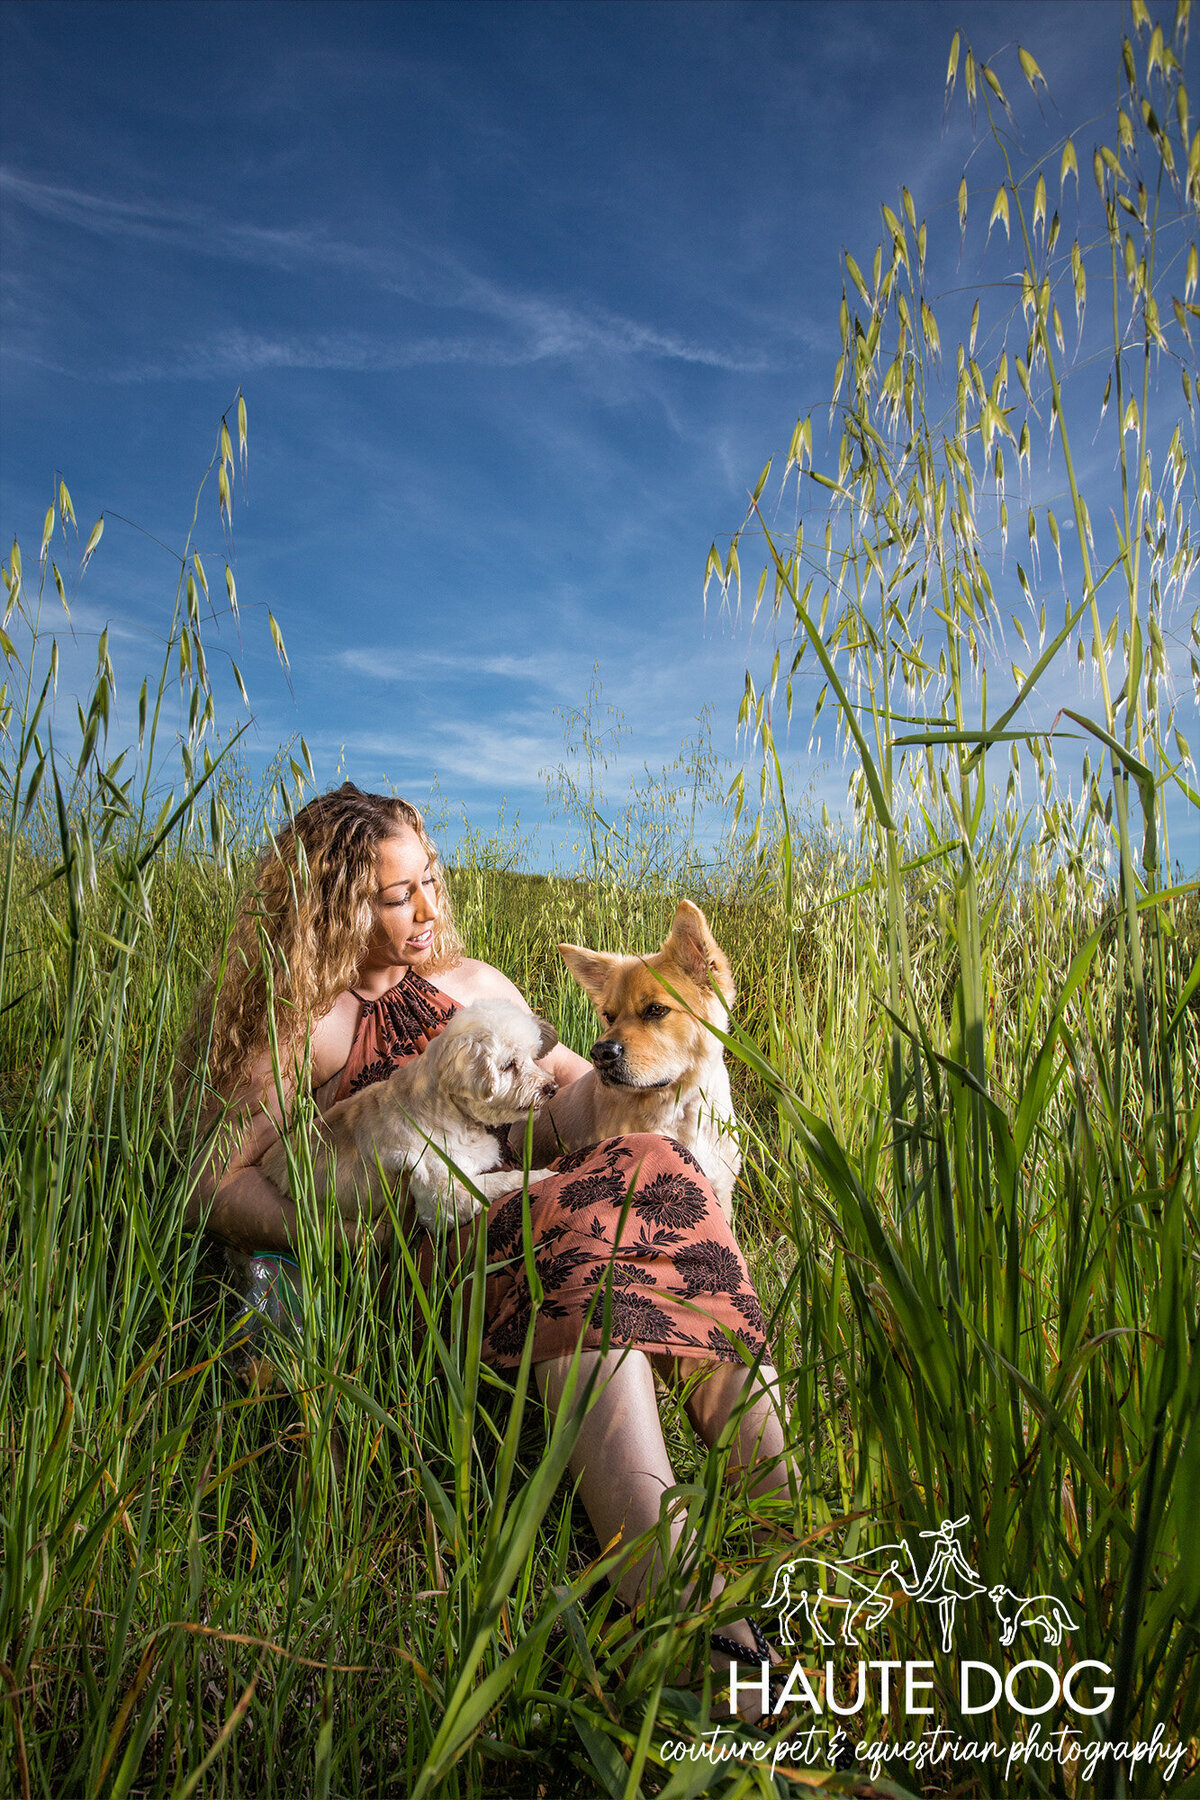 A woman sitting in a field with two dogs, surrounded by tall grass and greenery.